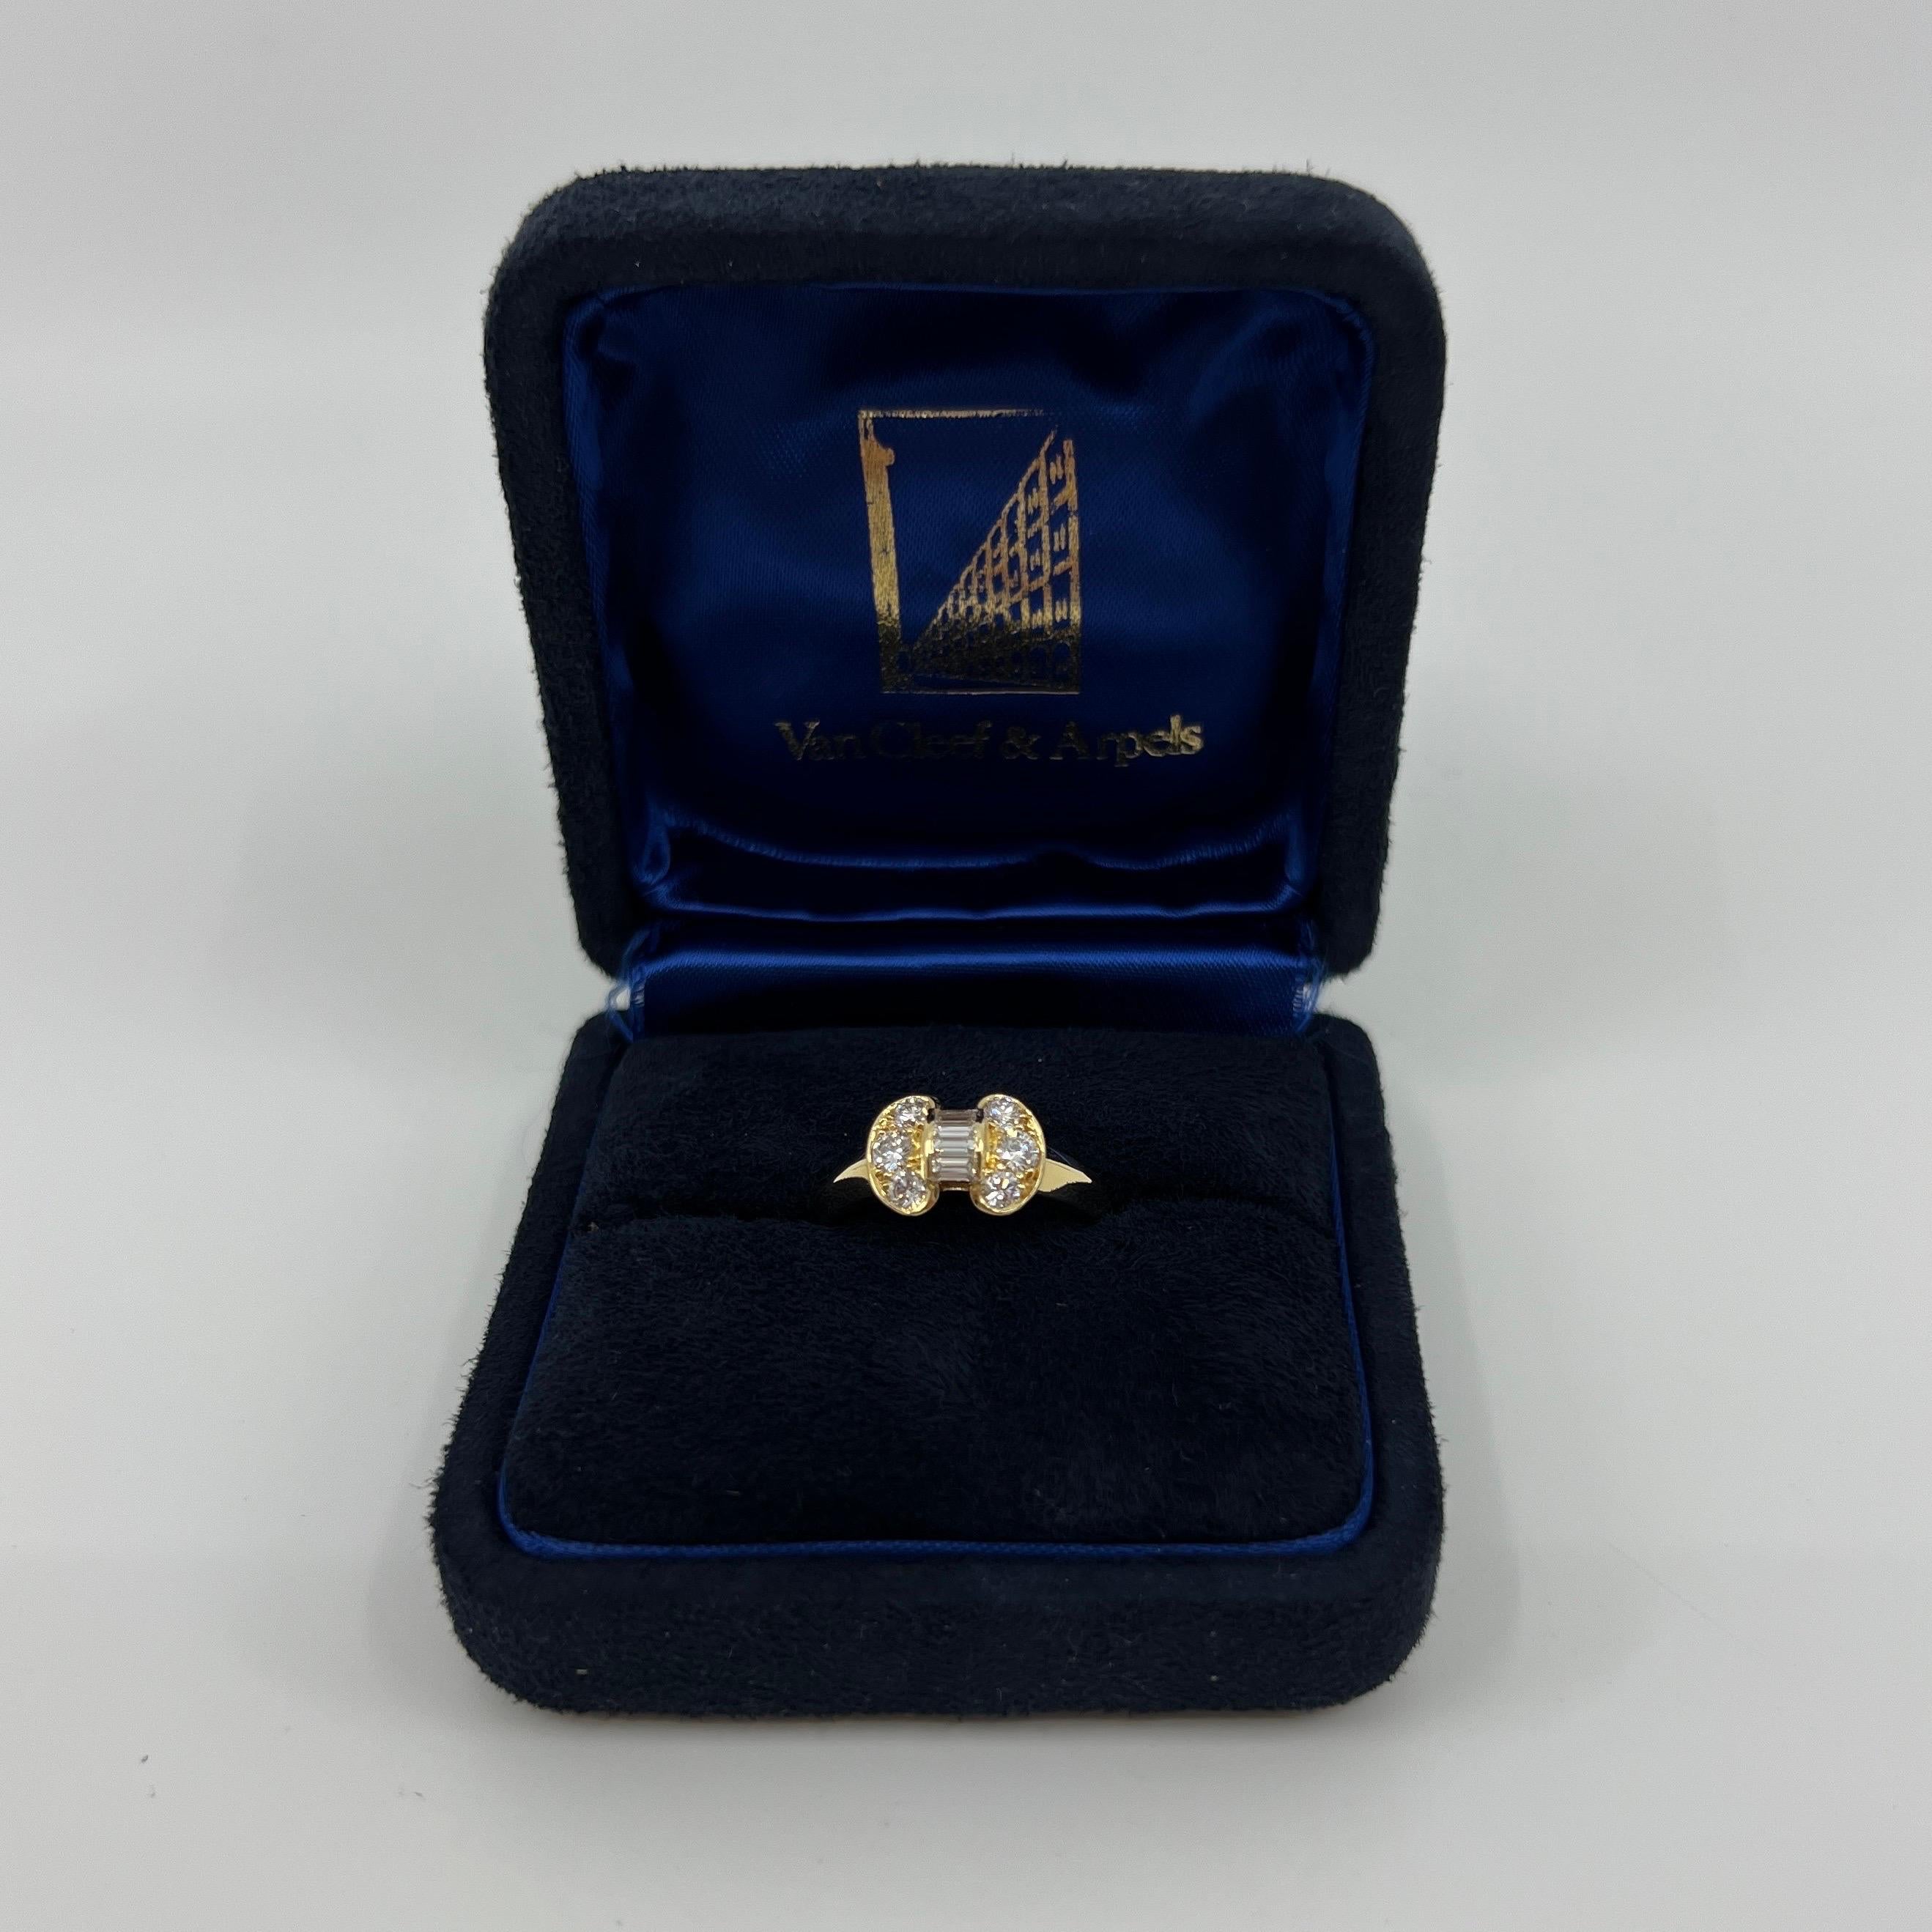 Rare Vintage Van Cleef & Arpels Diamond Ribbon 18k Yellow Gold Bow Ring.

A stunning vintage ring with a unique design typical of Van Cleef & Arpels, set with a beautiful arrangement of top quality white diamonds.
Fine baguette and round brilliant